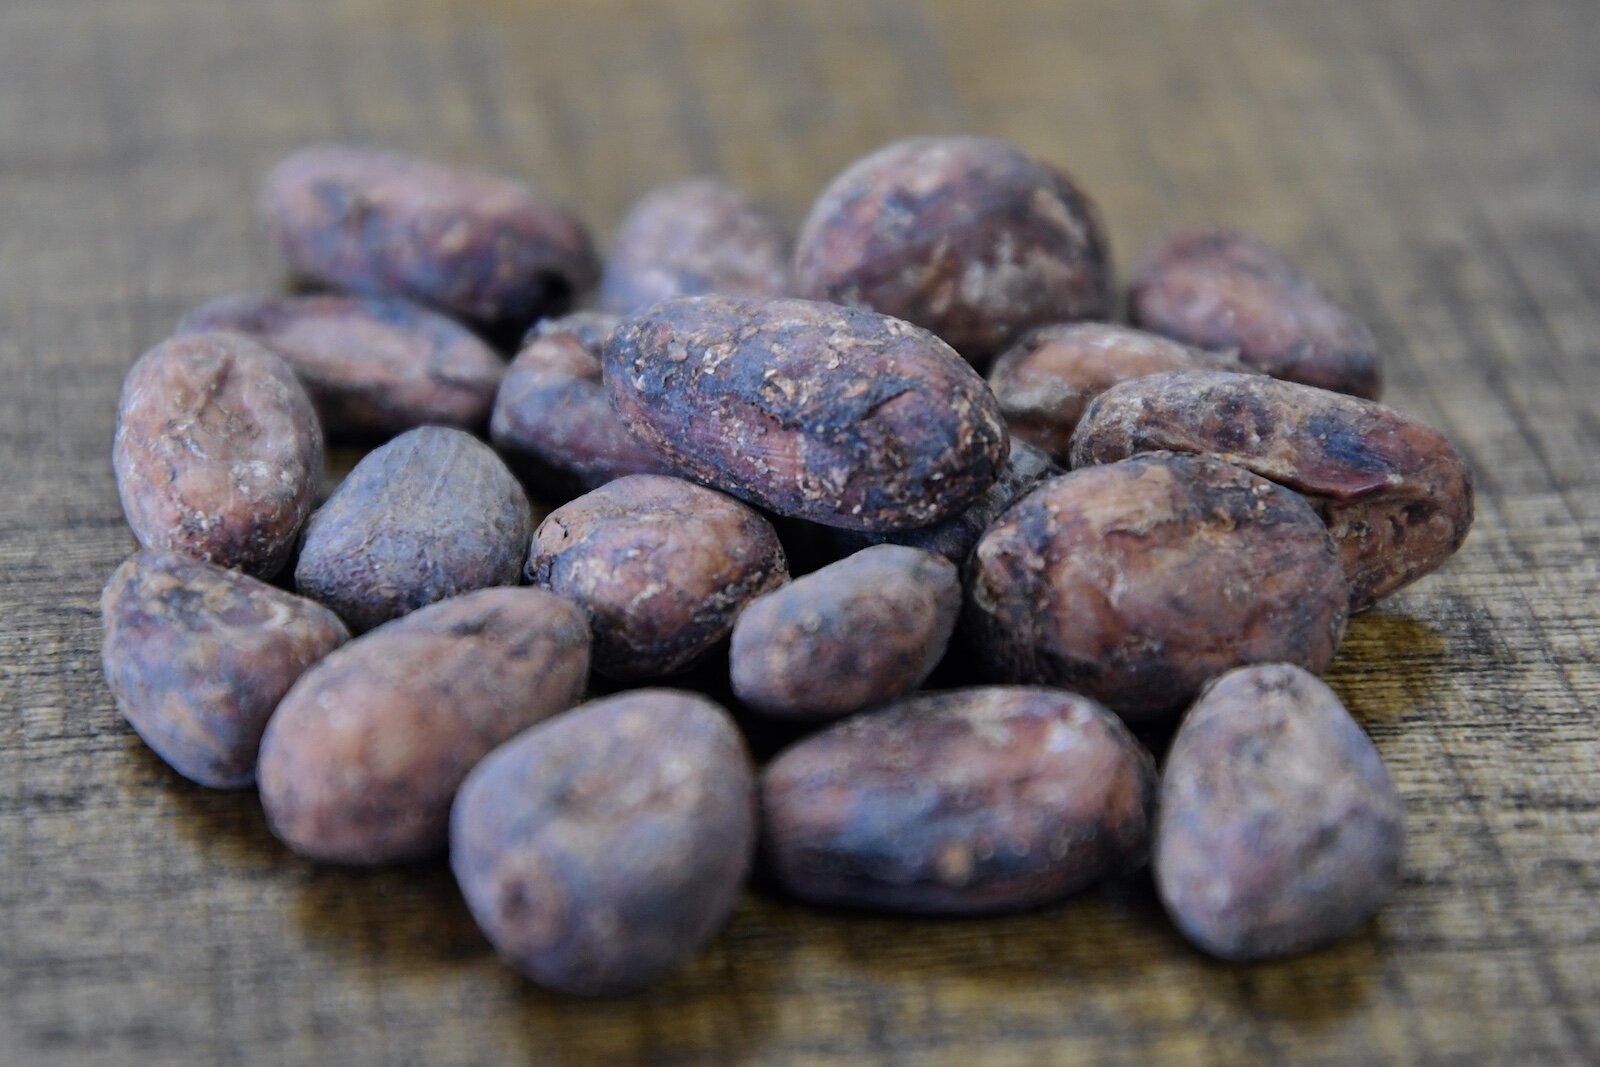 Raw cacao beans from Uganda